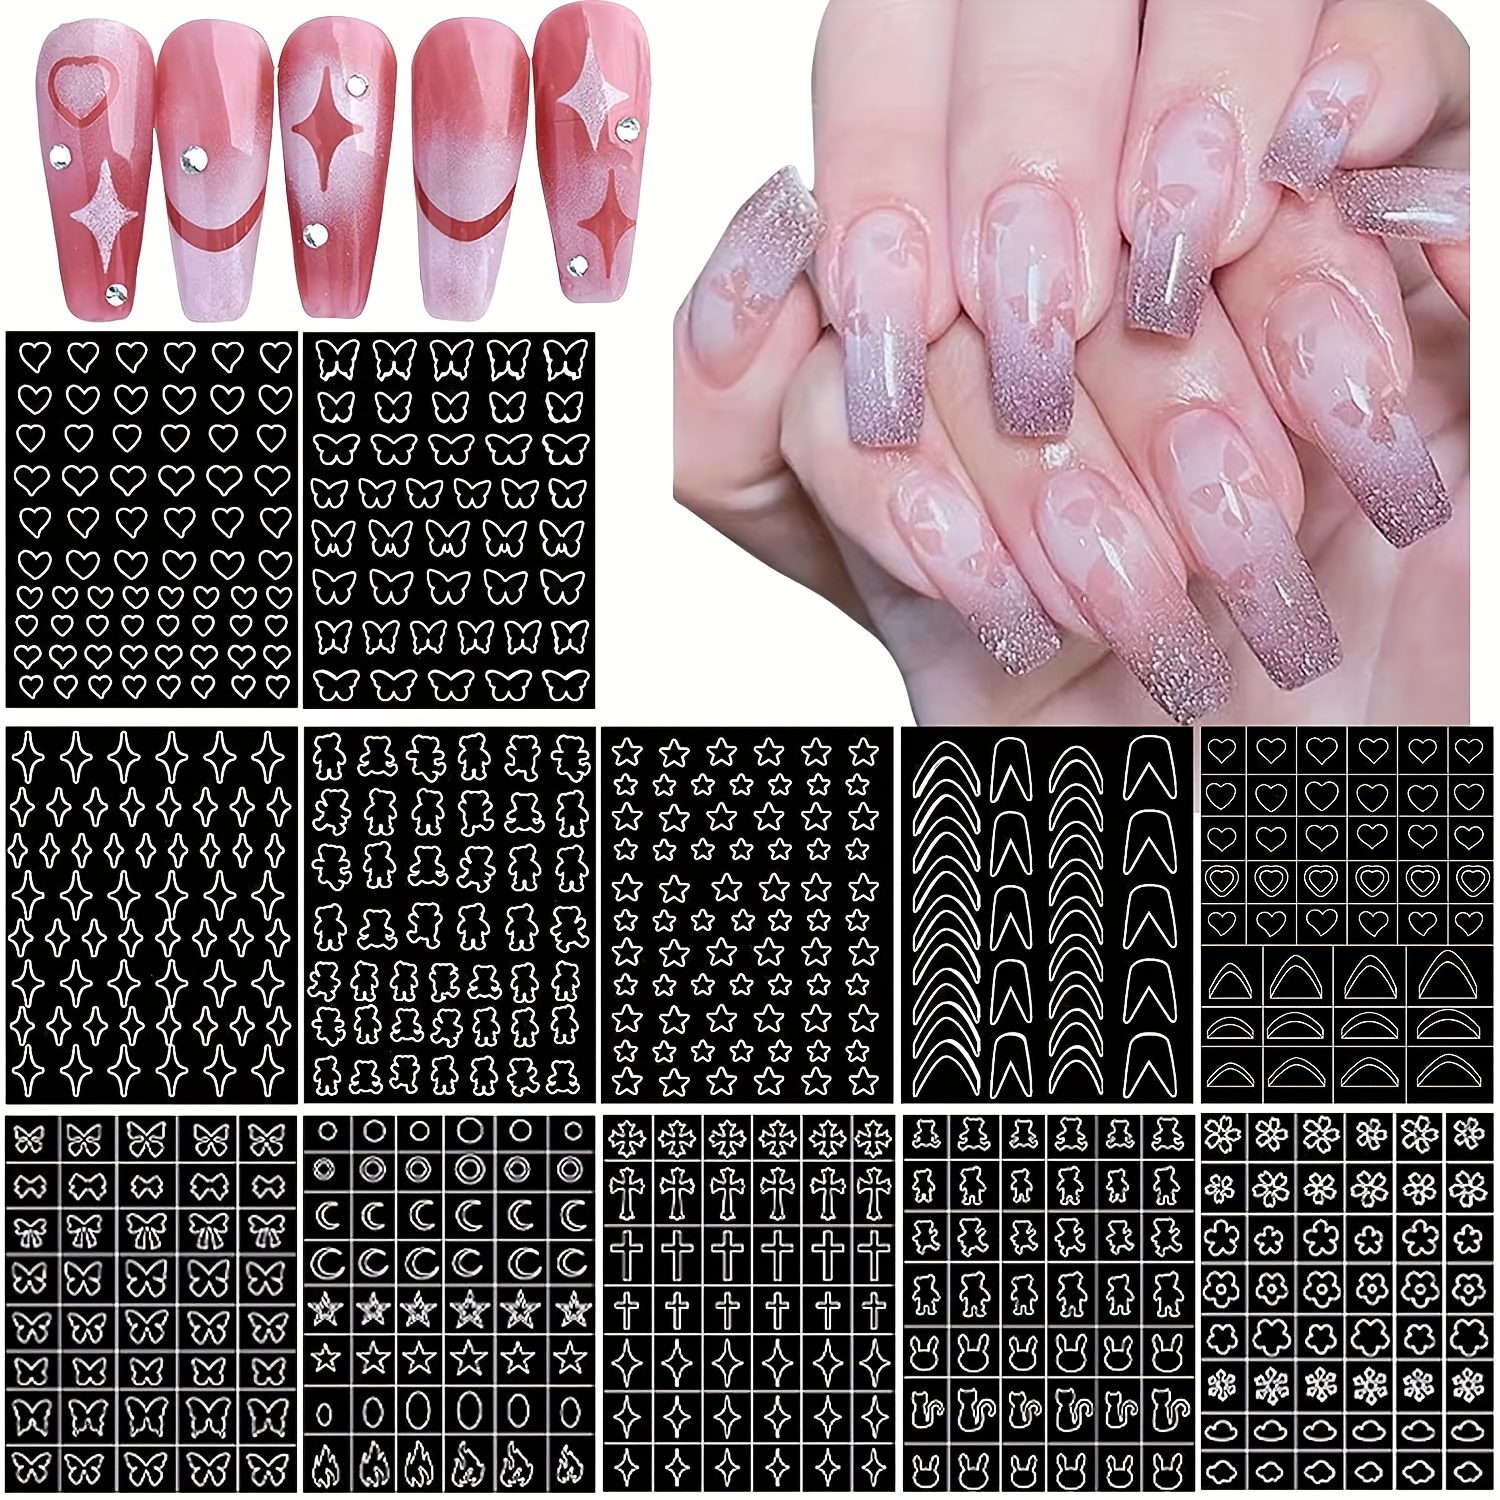 Silvery Patterned Nail Art Stickers With Red Heart, Star, And Moon Shapes -  Self-adhesive Nail Decals For Easy Application And Stunning Designs - Temu